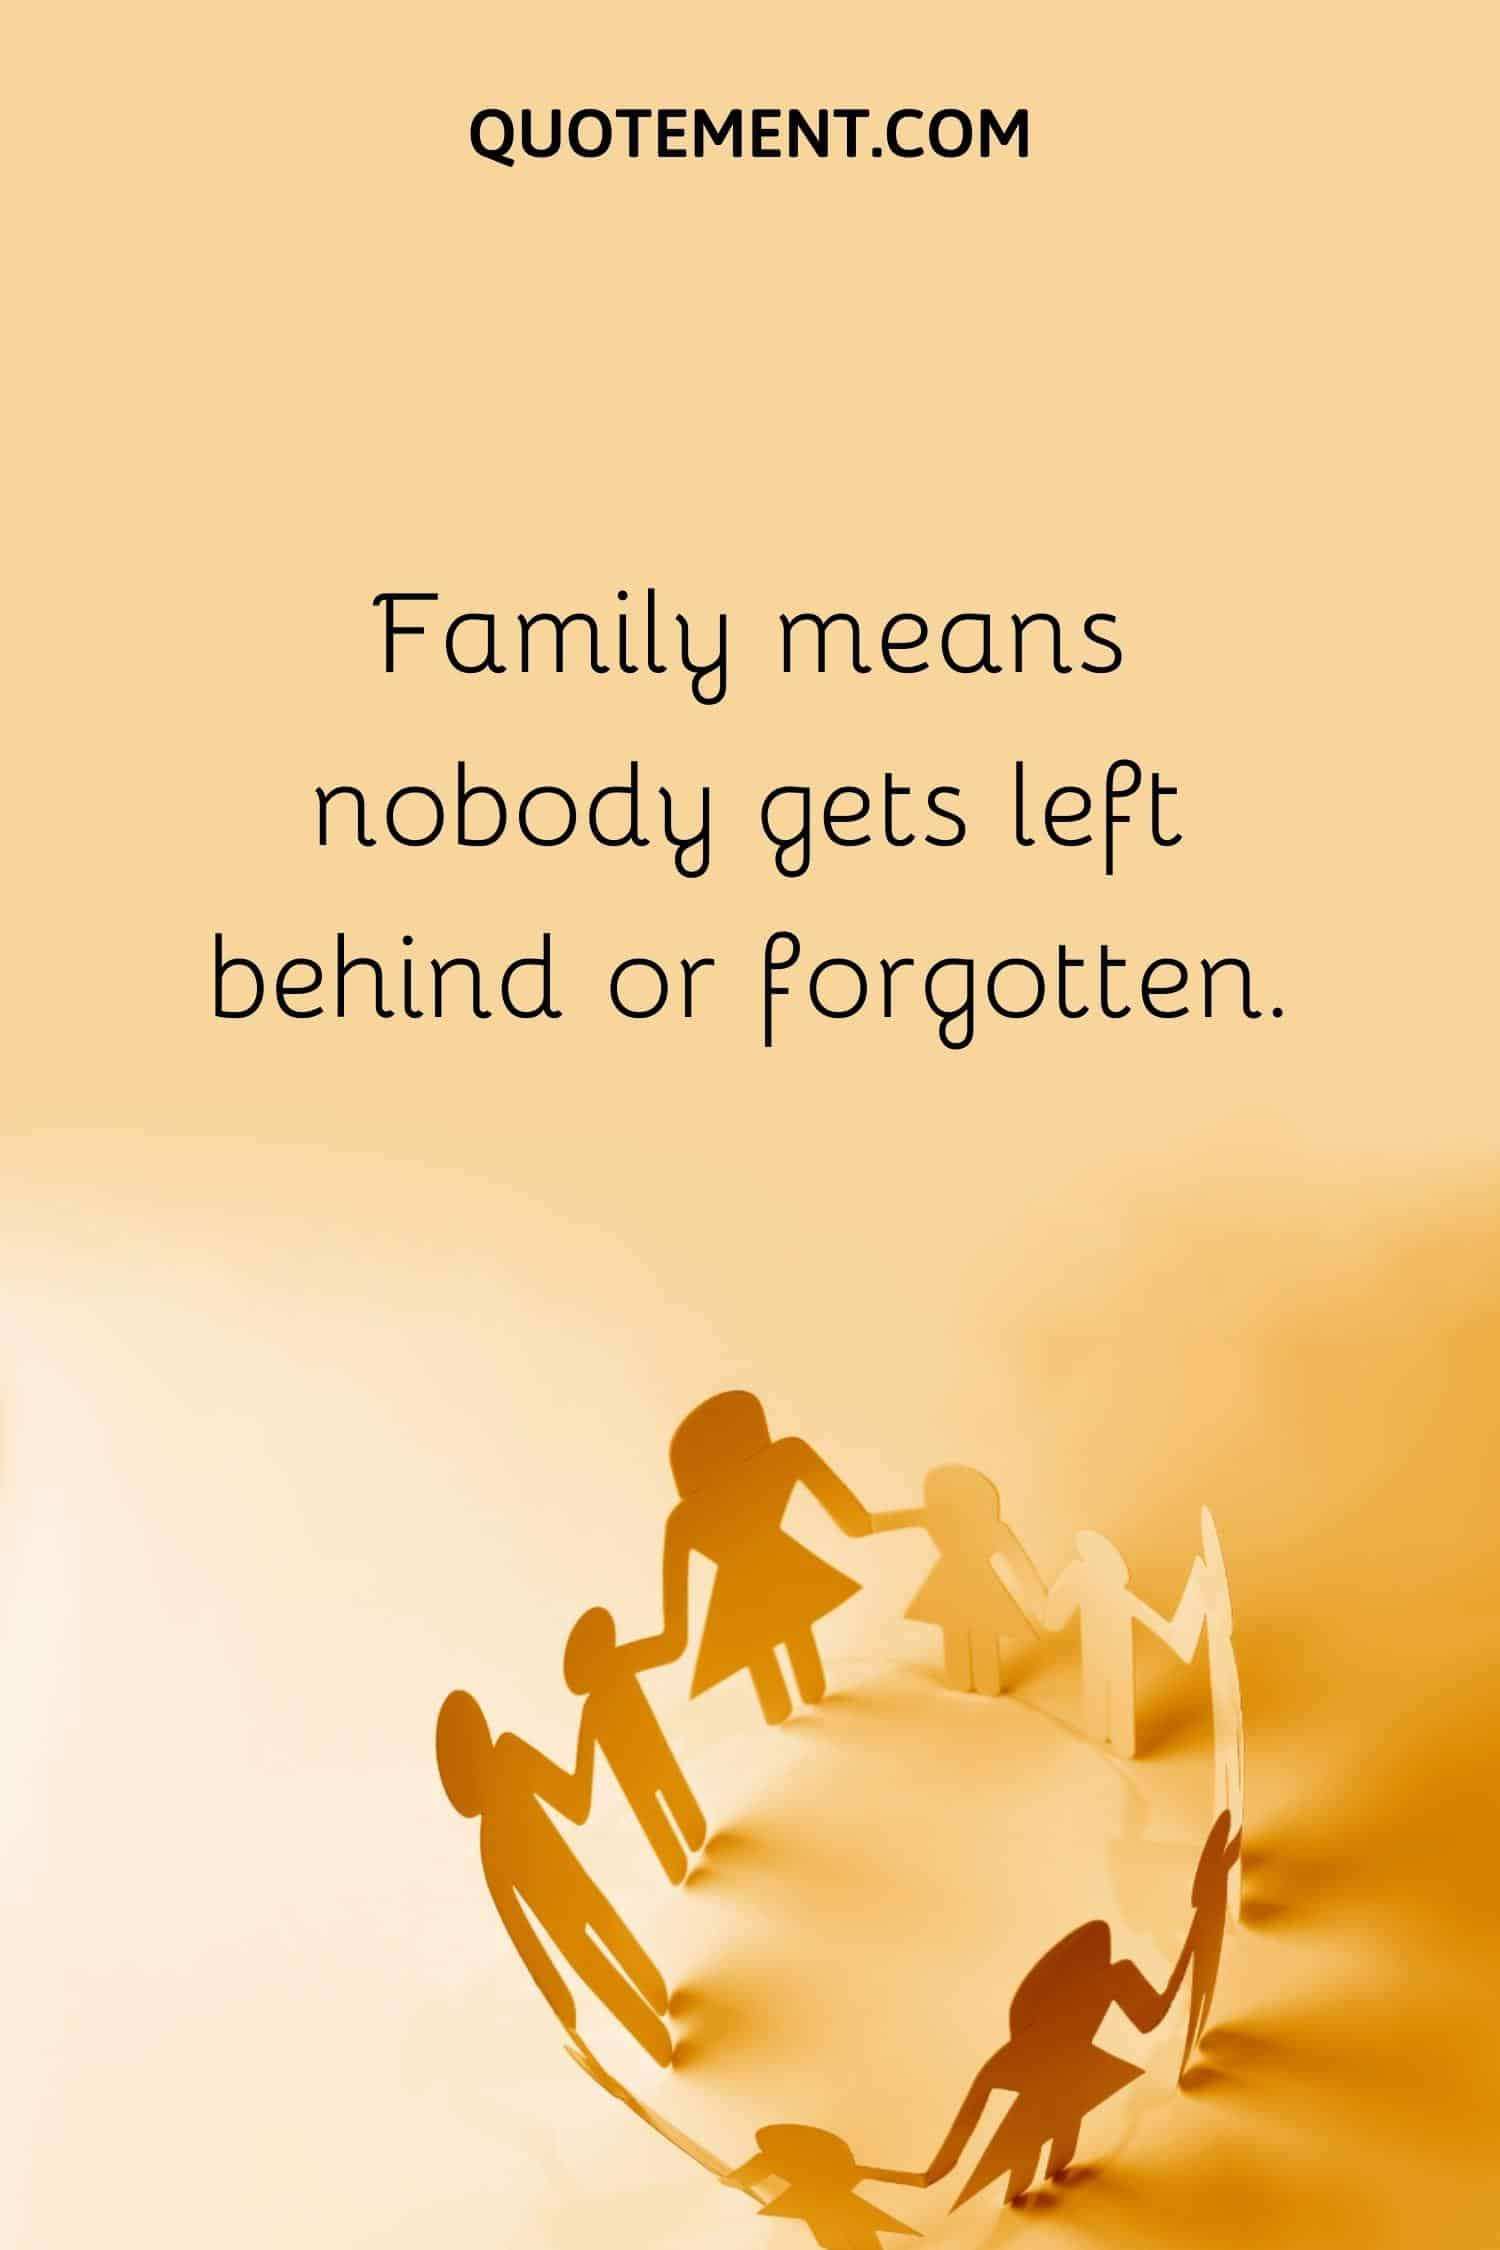 Family means nobody gets left behind or forgotten